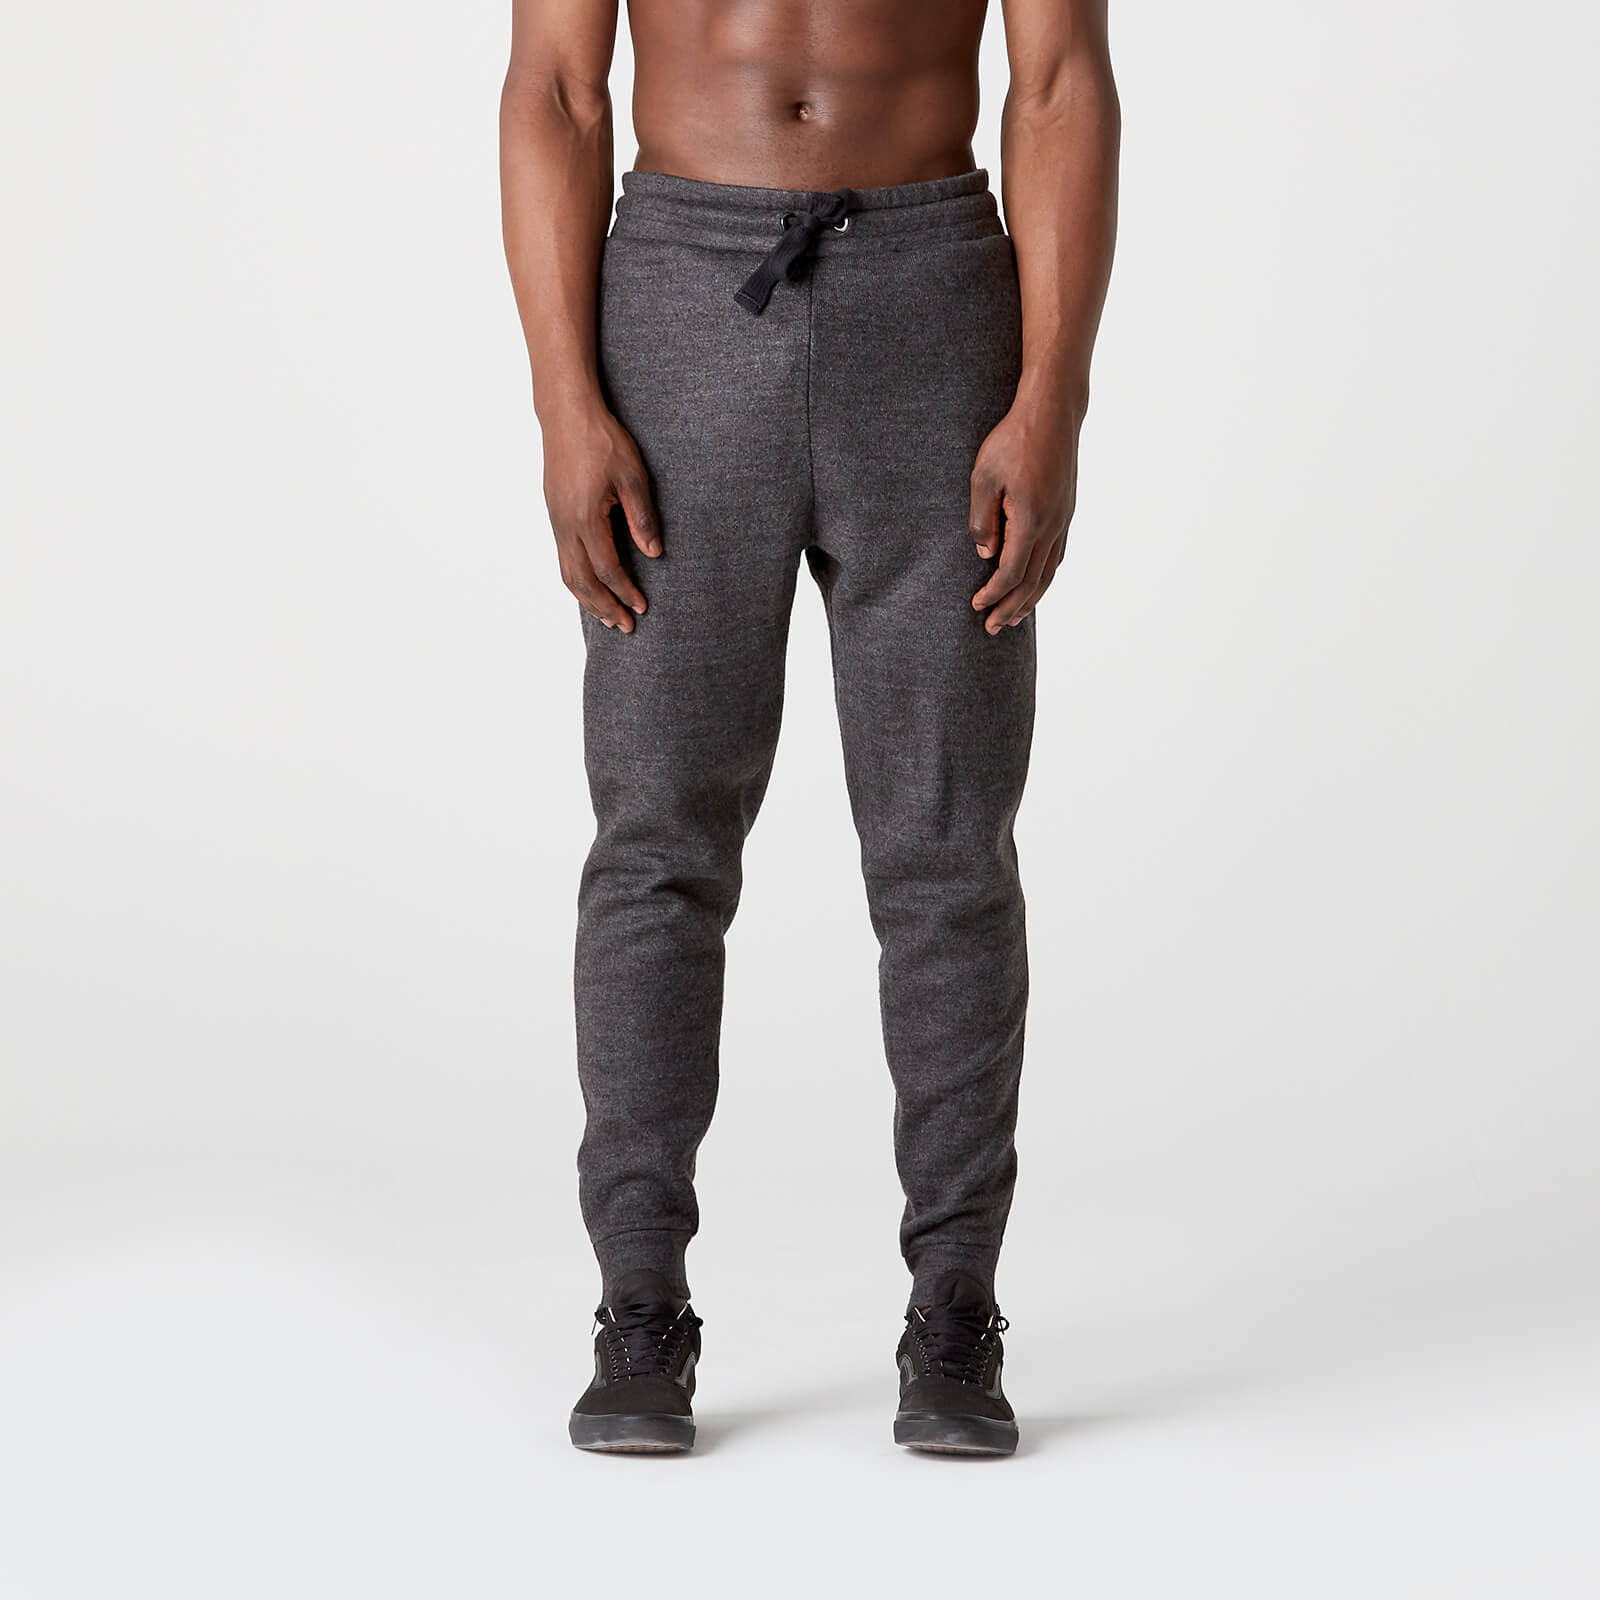 Myprotein Luxe Leisure Joggers - Slate - XS